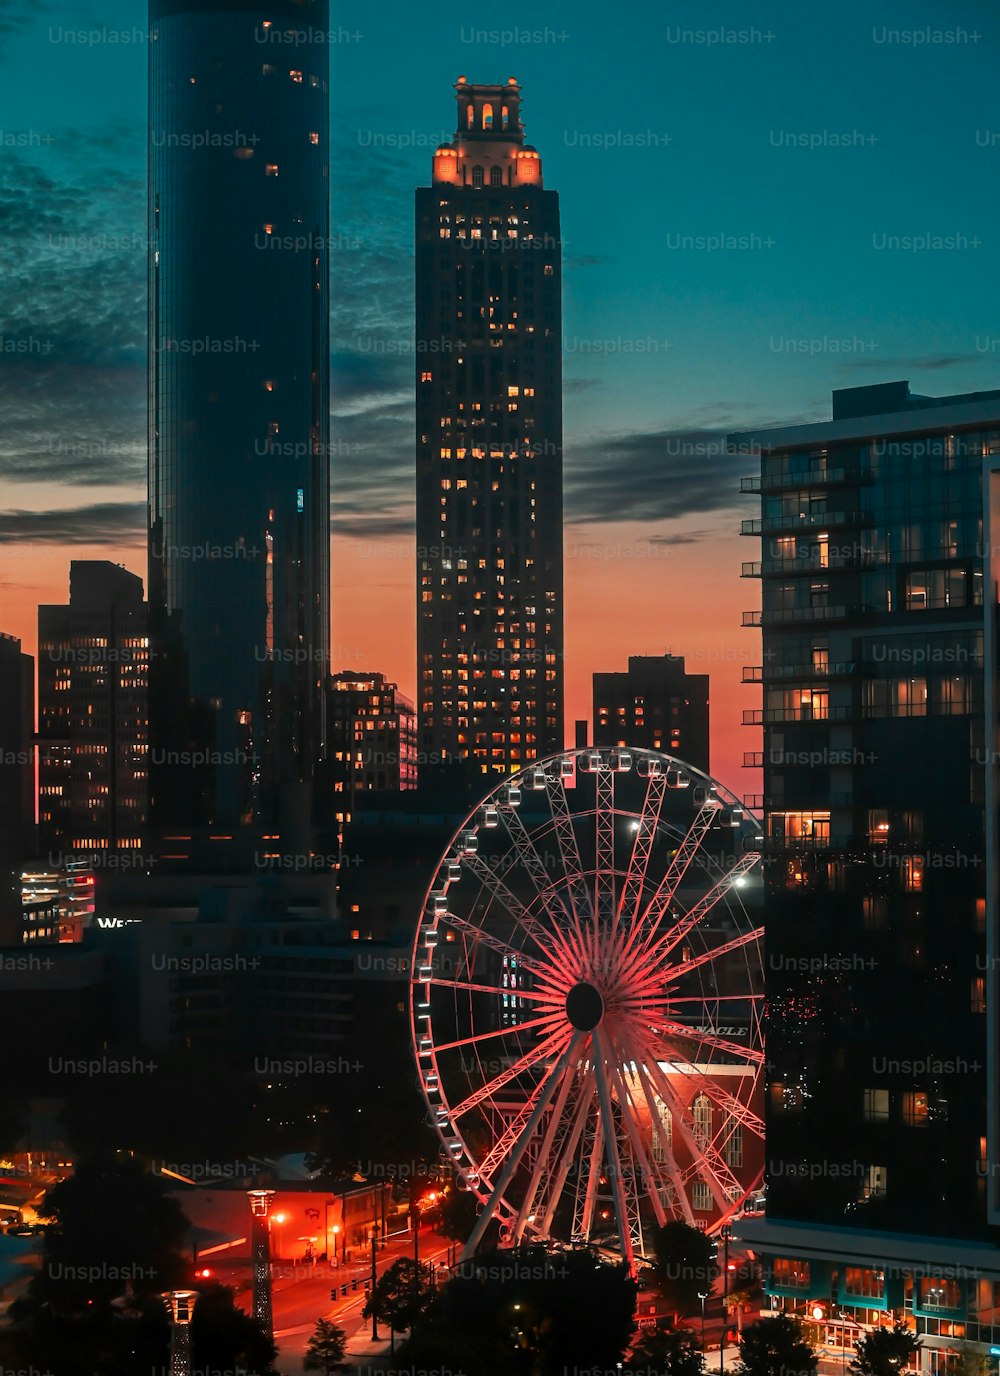 An aerial view of Atlanta City featuring an array of tall skyscrapers with a large ferris wheel in the foreground